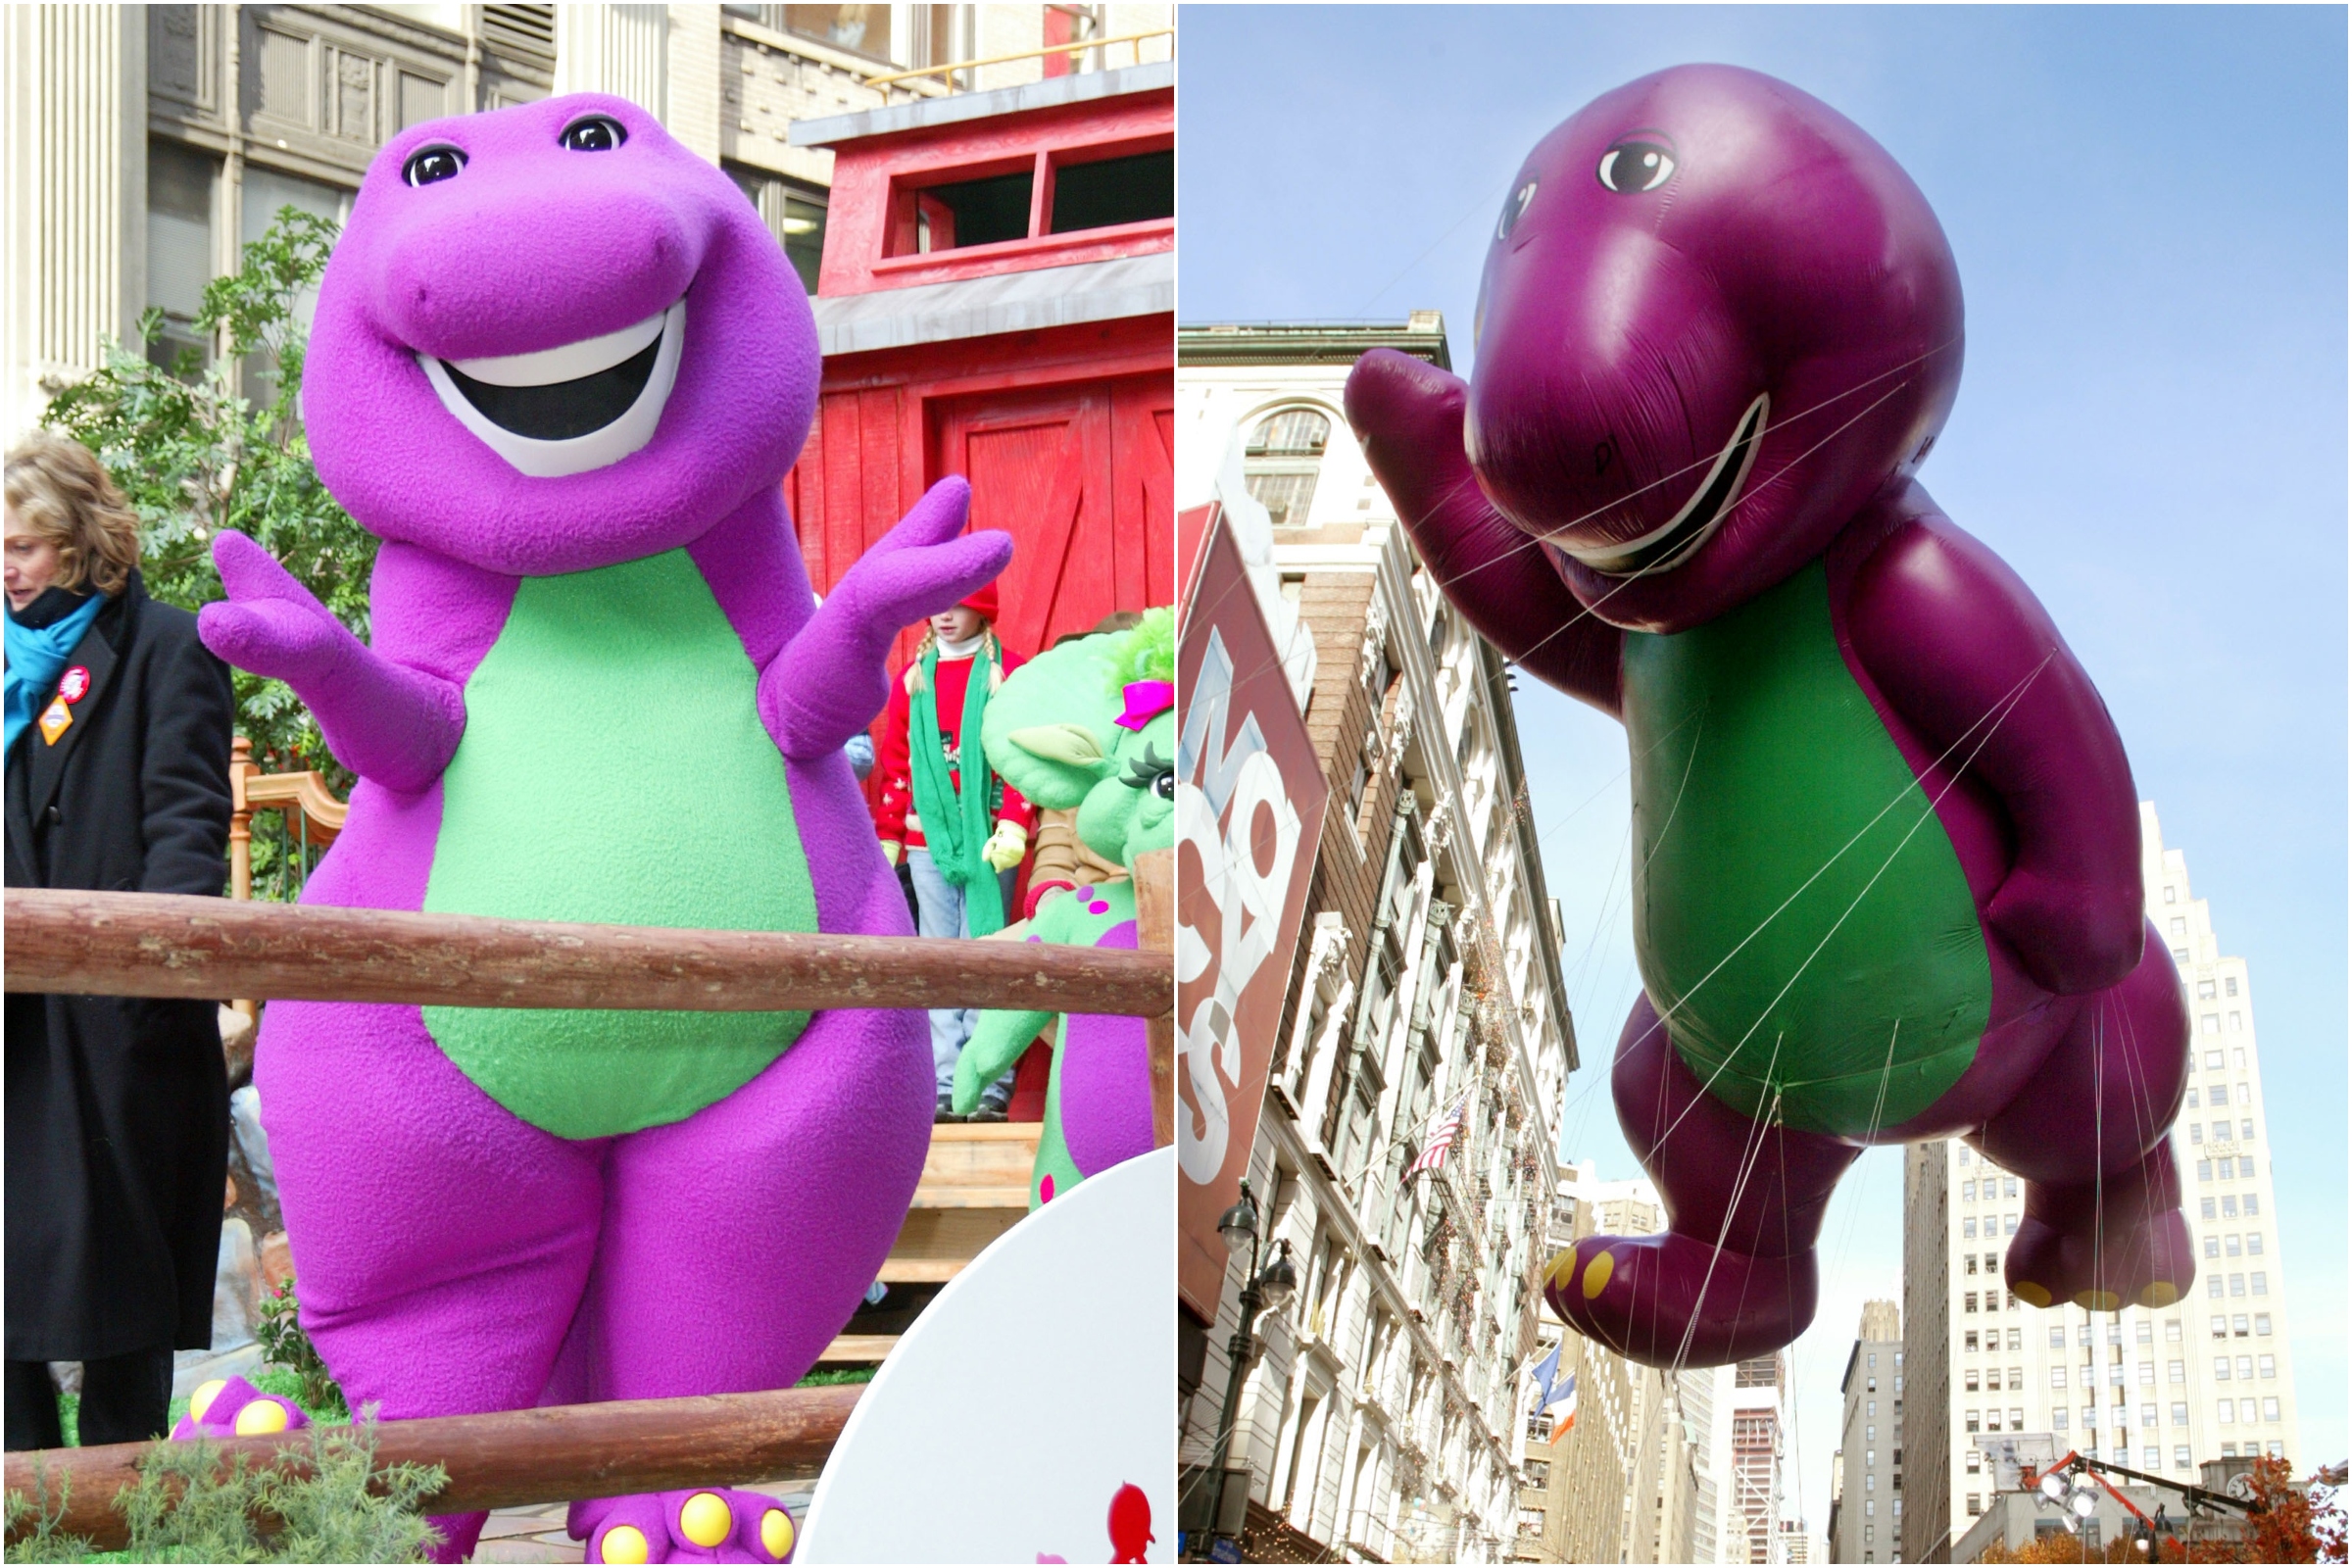 Barney’s Thanksgiving Day Parade ‘Tragedy’ Resurfaces—’Childhood Destroyed’